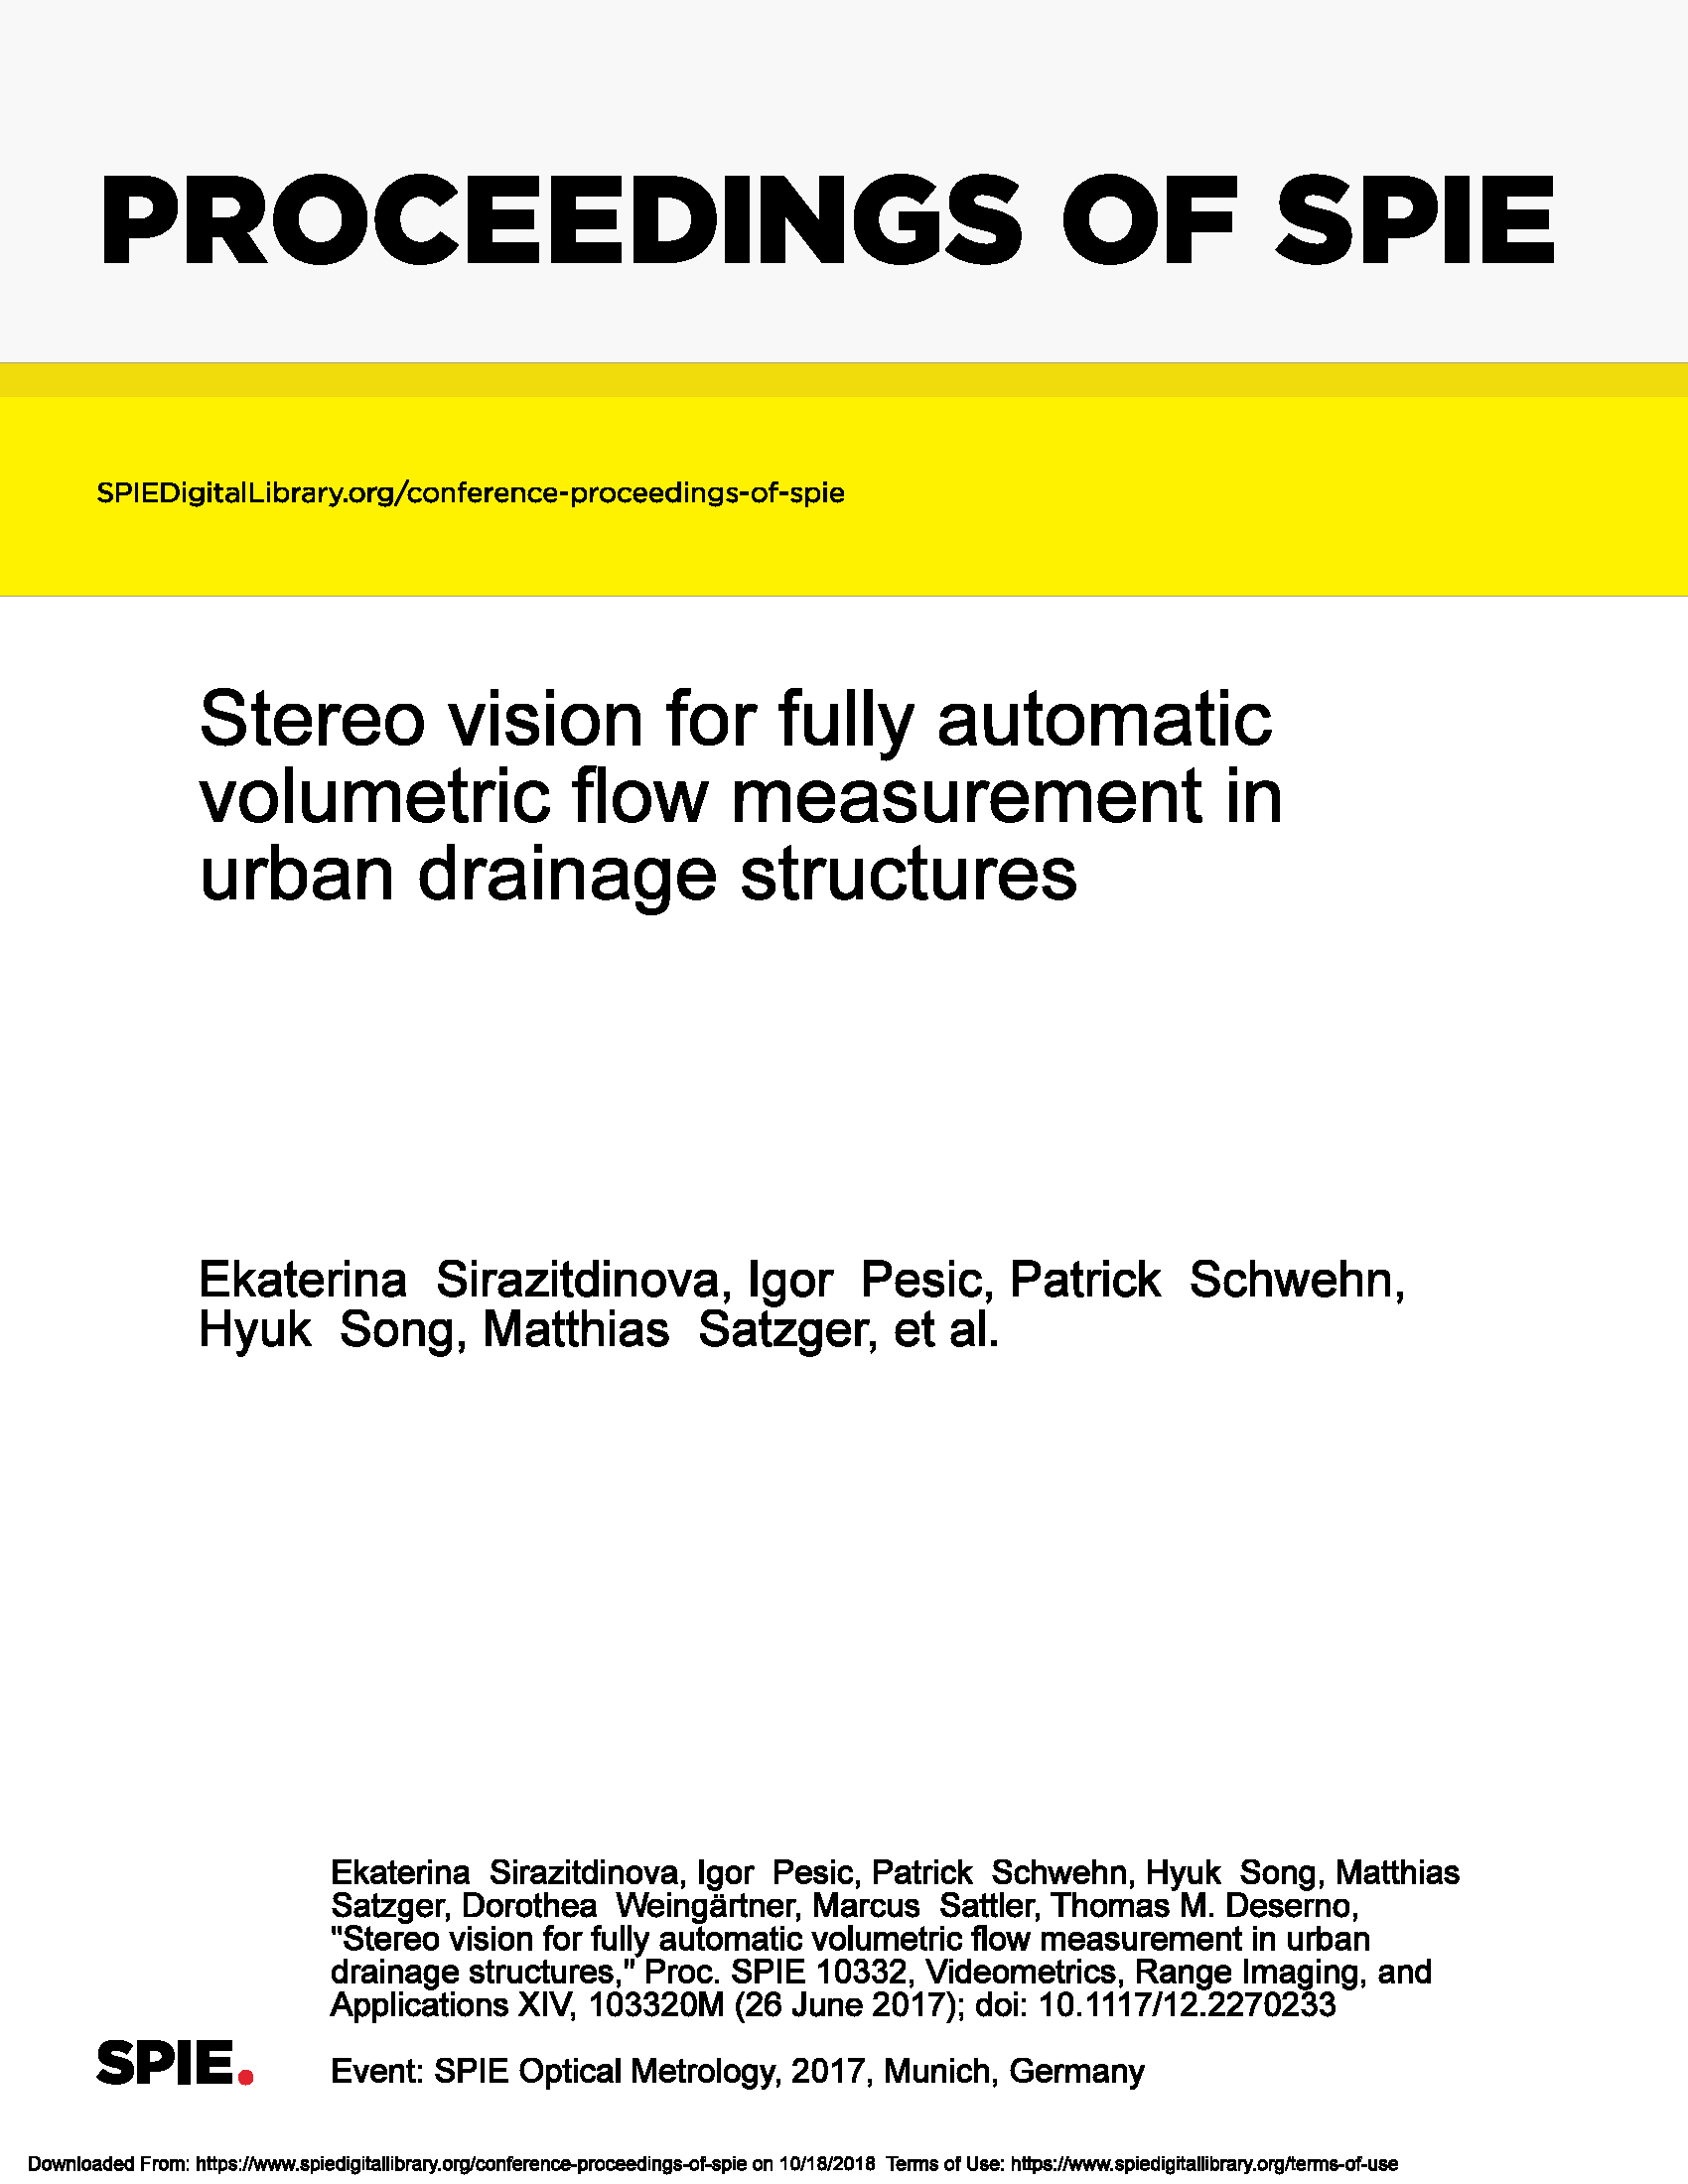 Stereo vision for fully automatic volumetric flow measurement in urban drainage structures